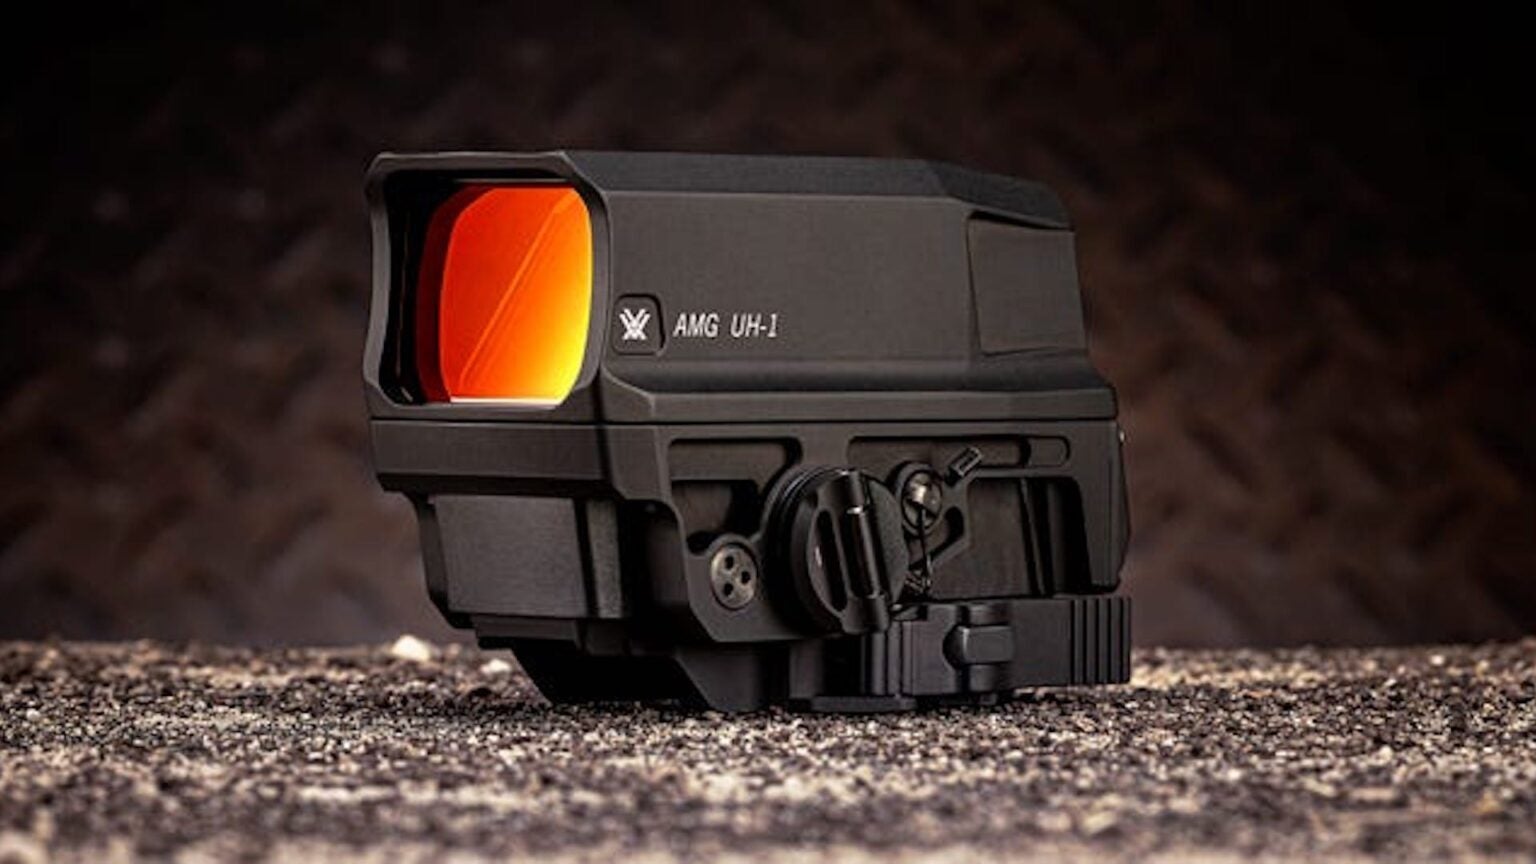 Here’s how a red dot sight works.